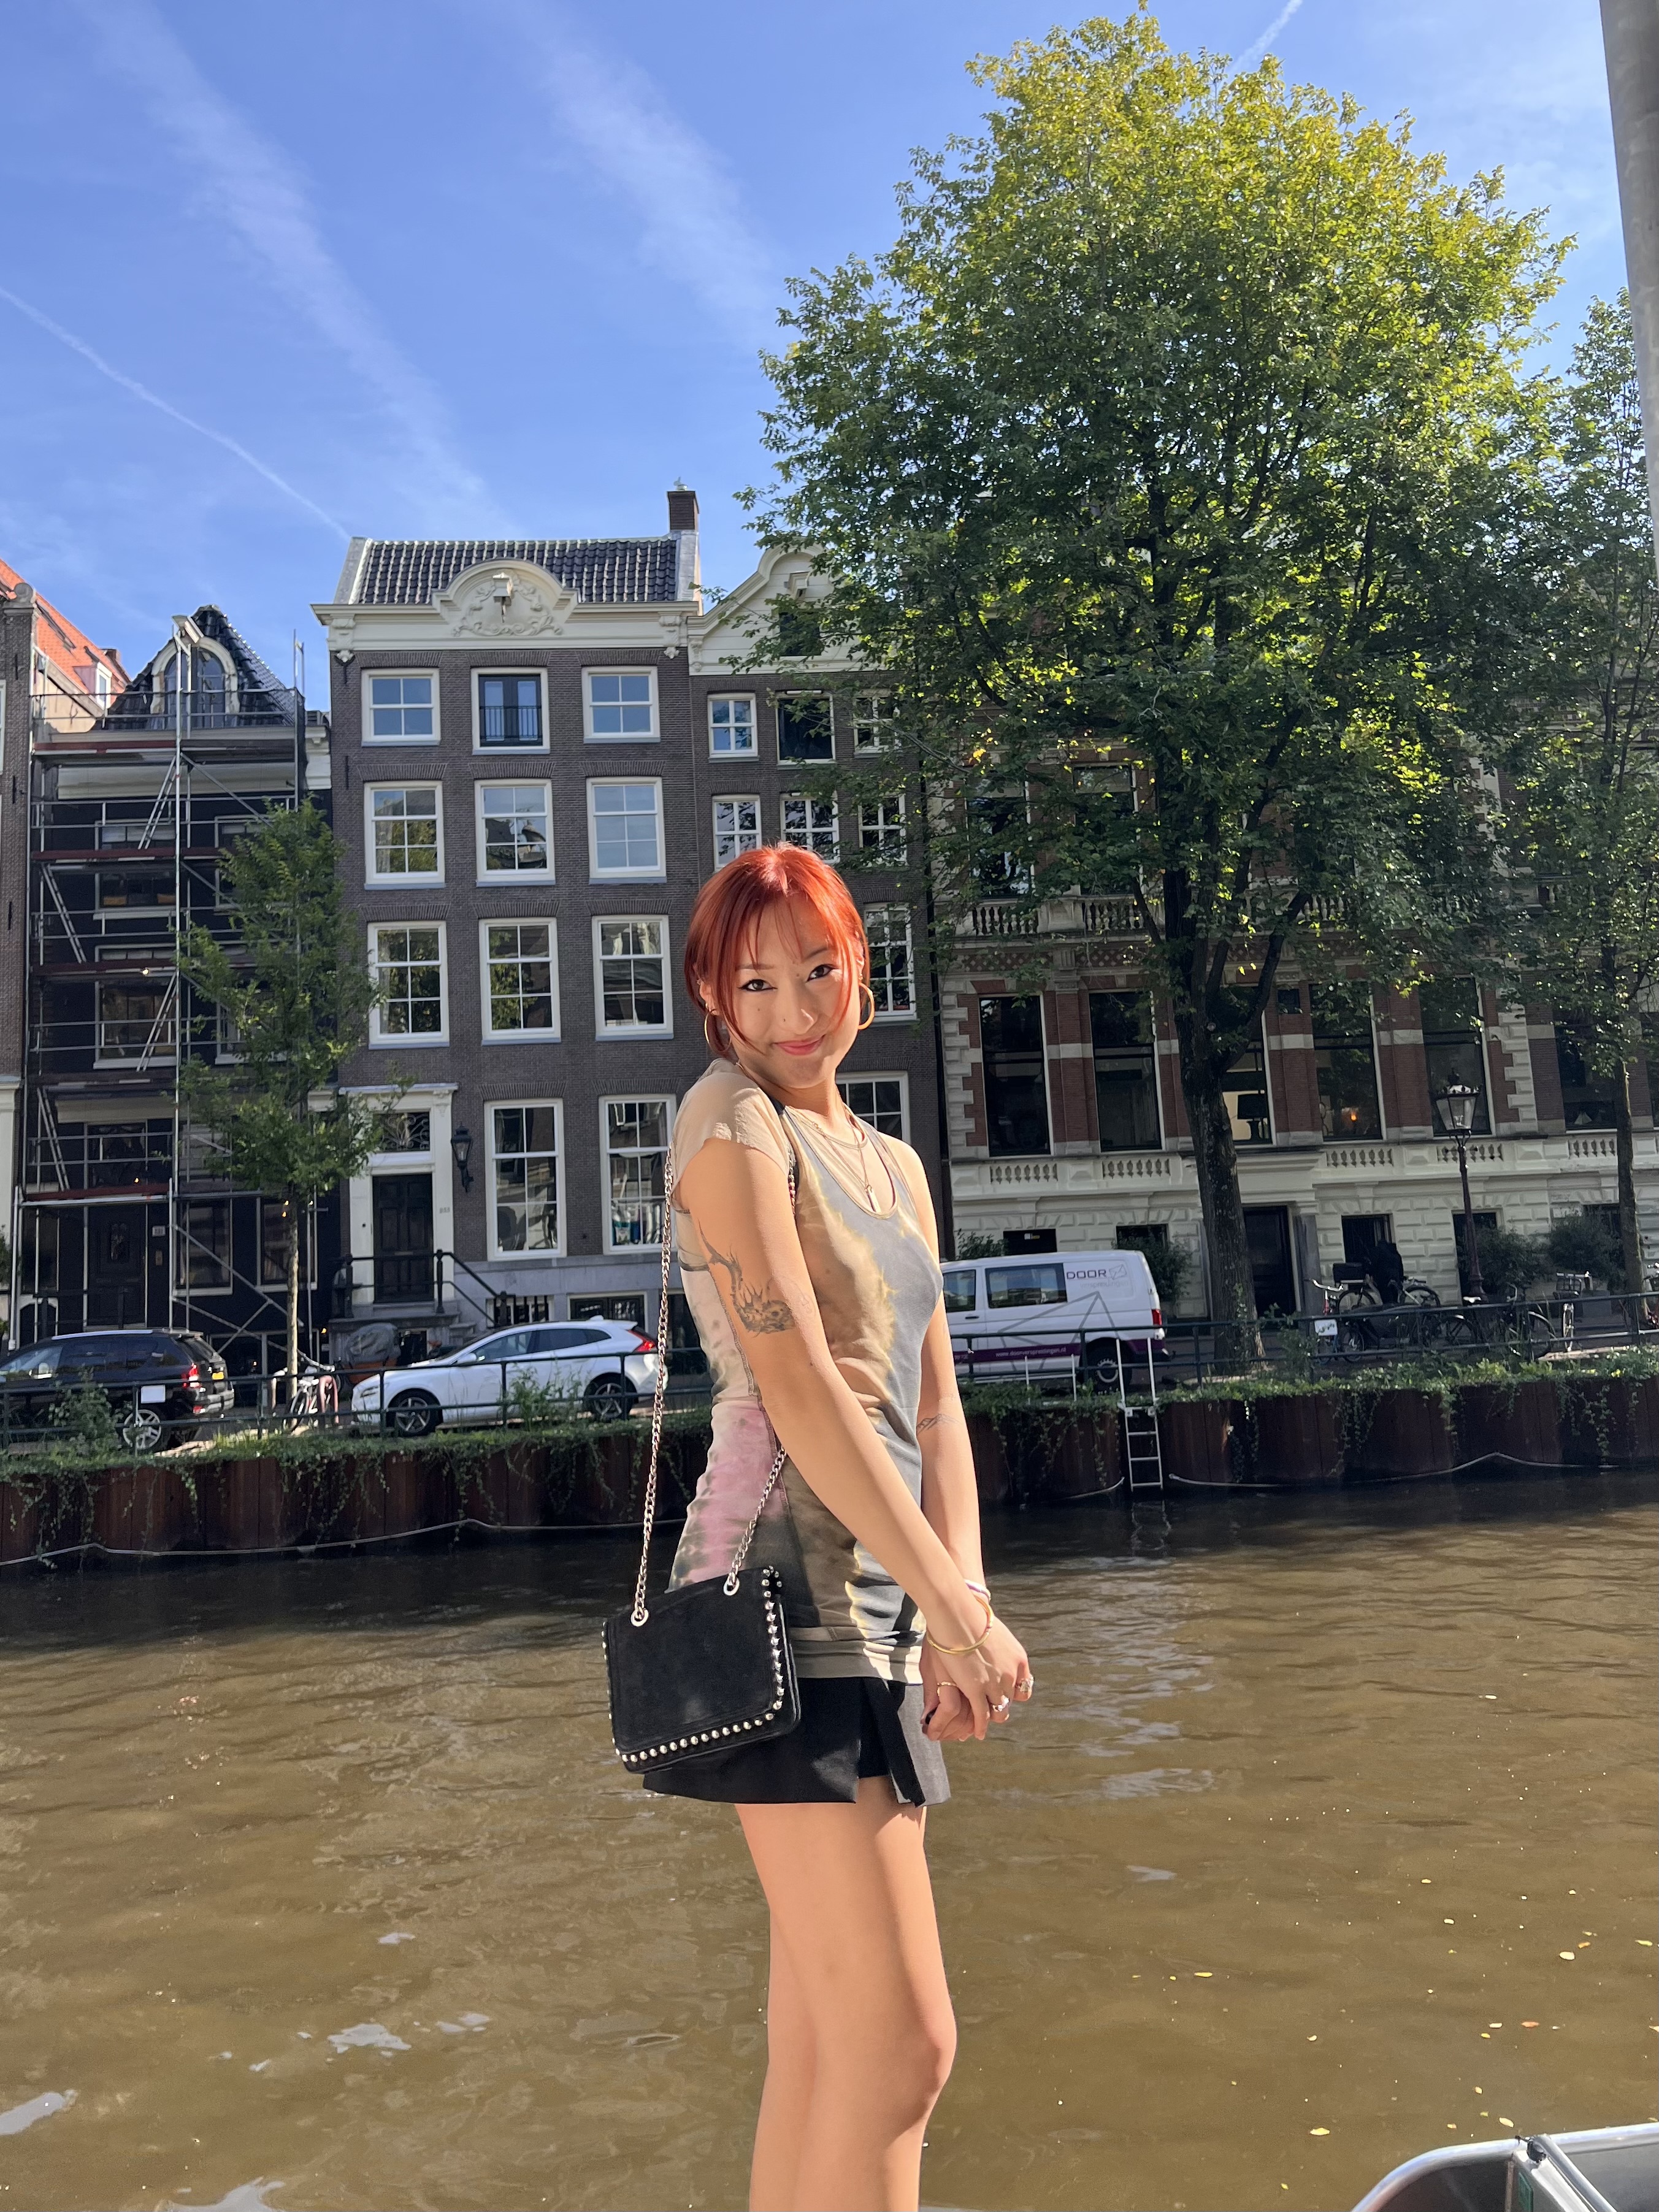 at central Amsterdam canal